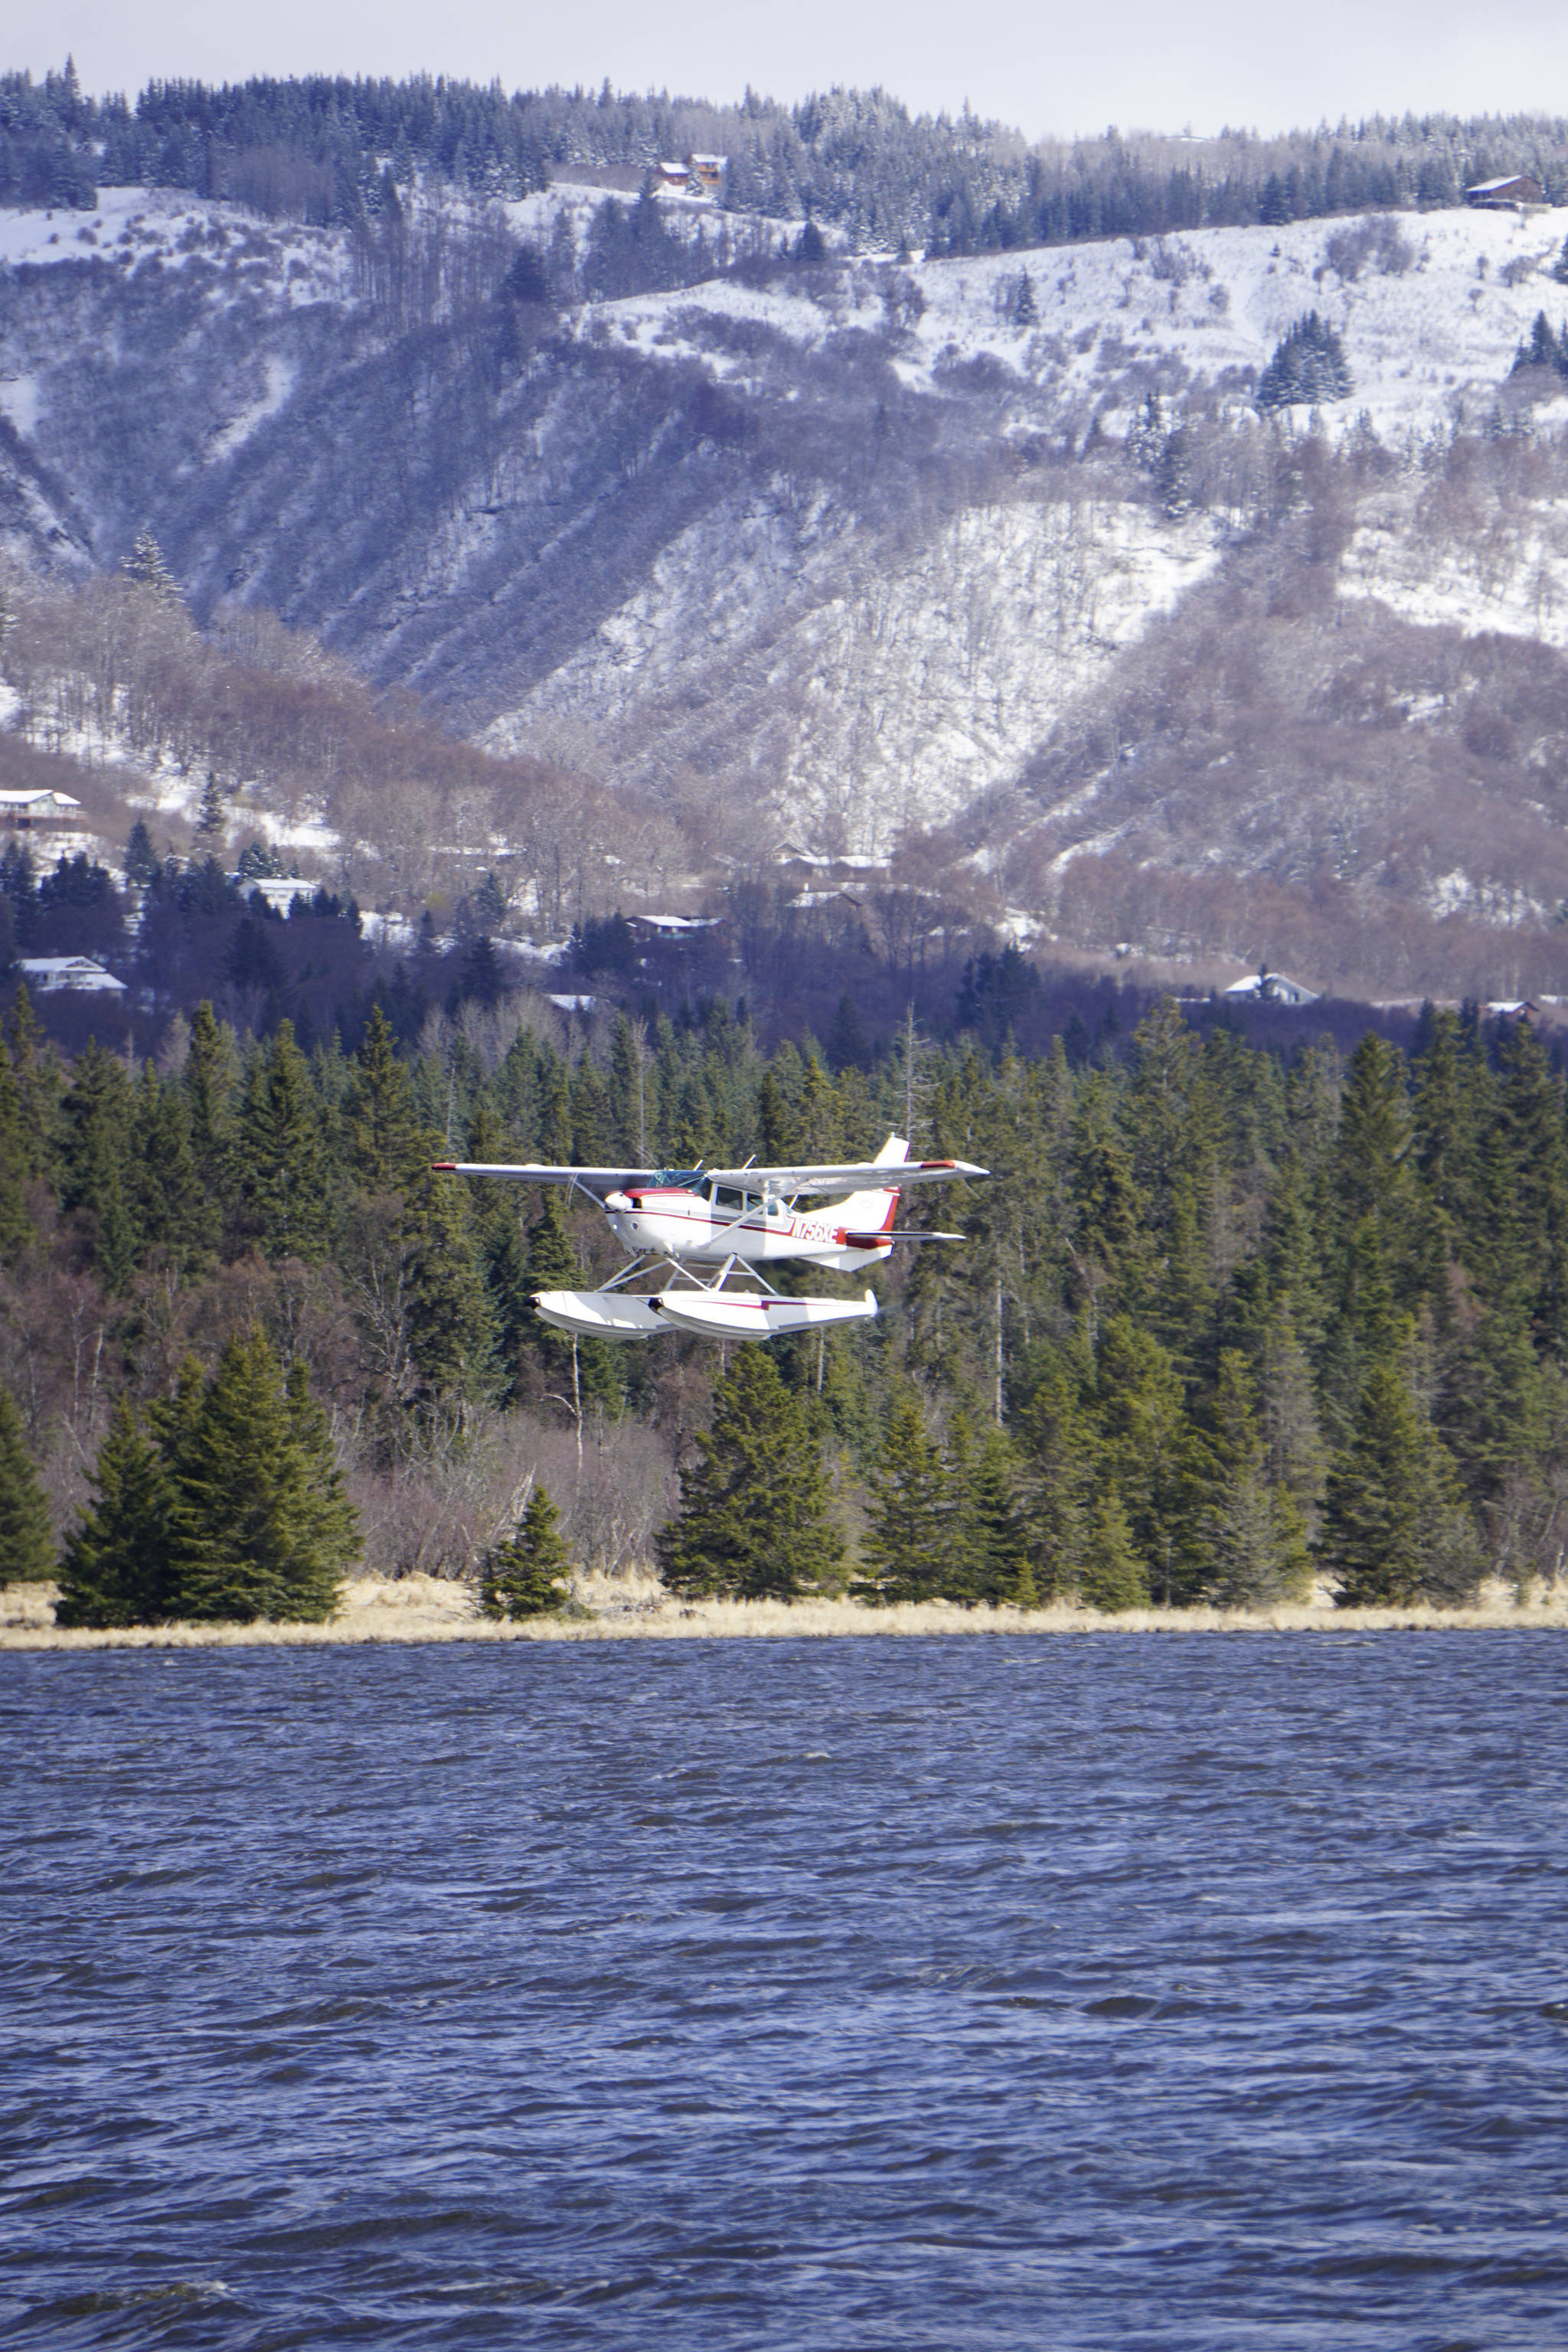 A floatplane takes off from Beluga Lake on Monday afternoon, April 22, 2019, in Homer, Alaska. Although a snow storm brought a taste of winter back to Homer after a deceptive spring, the lake remained open enough for float planes to start using it. (Photo by Michael Armstrong/Homer News)